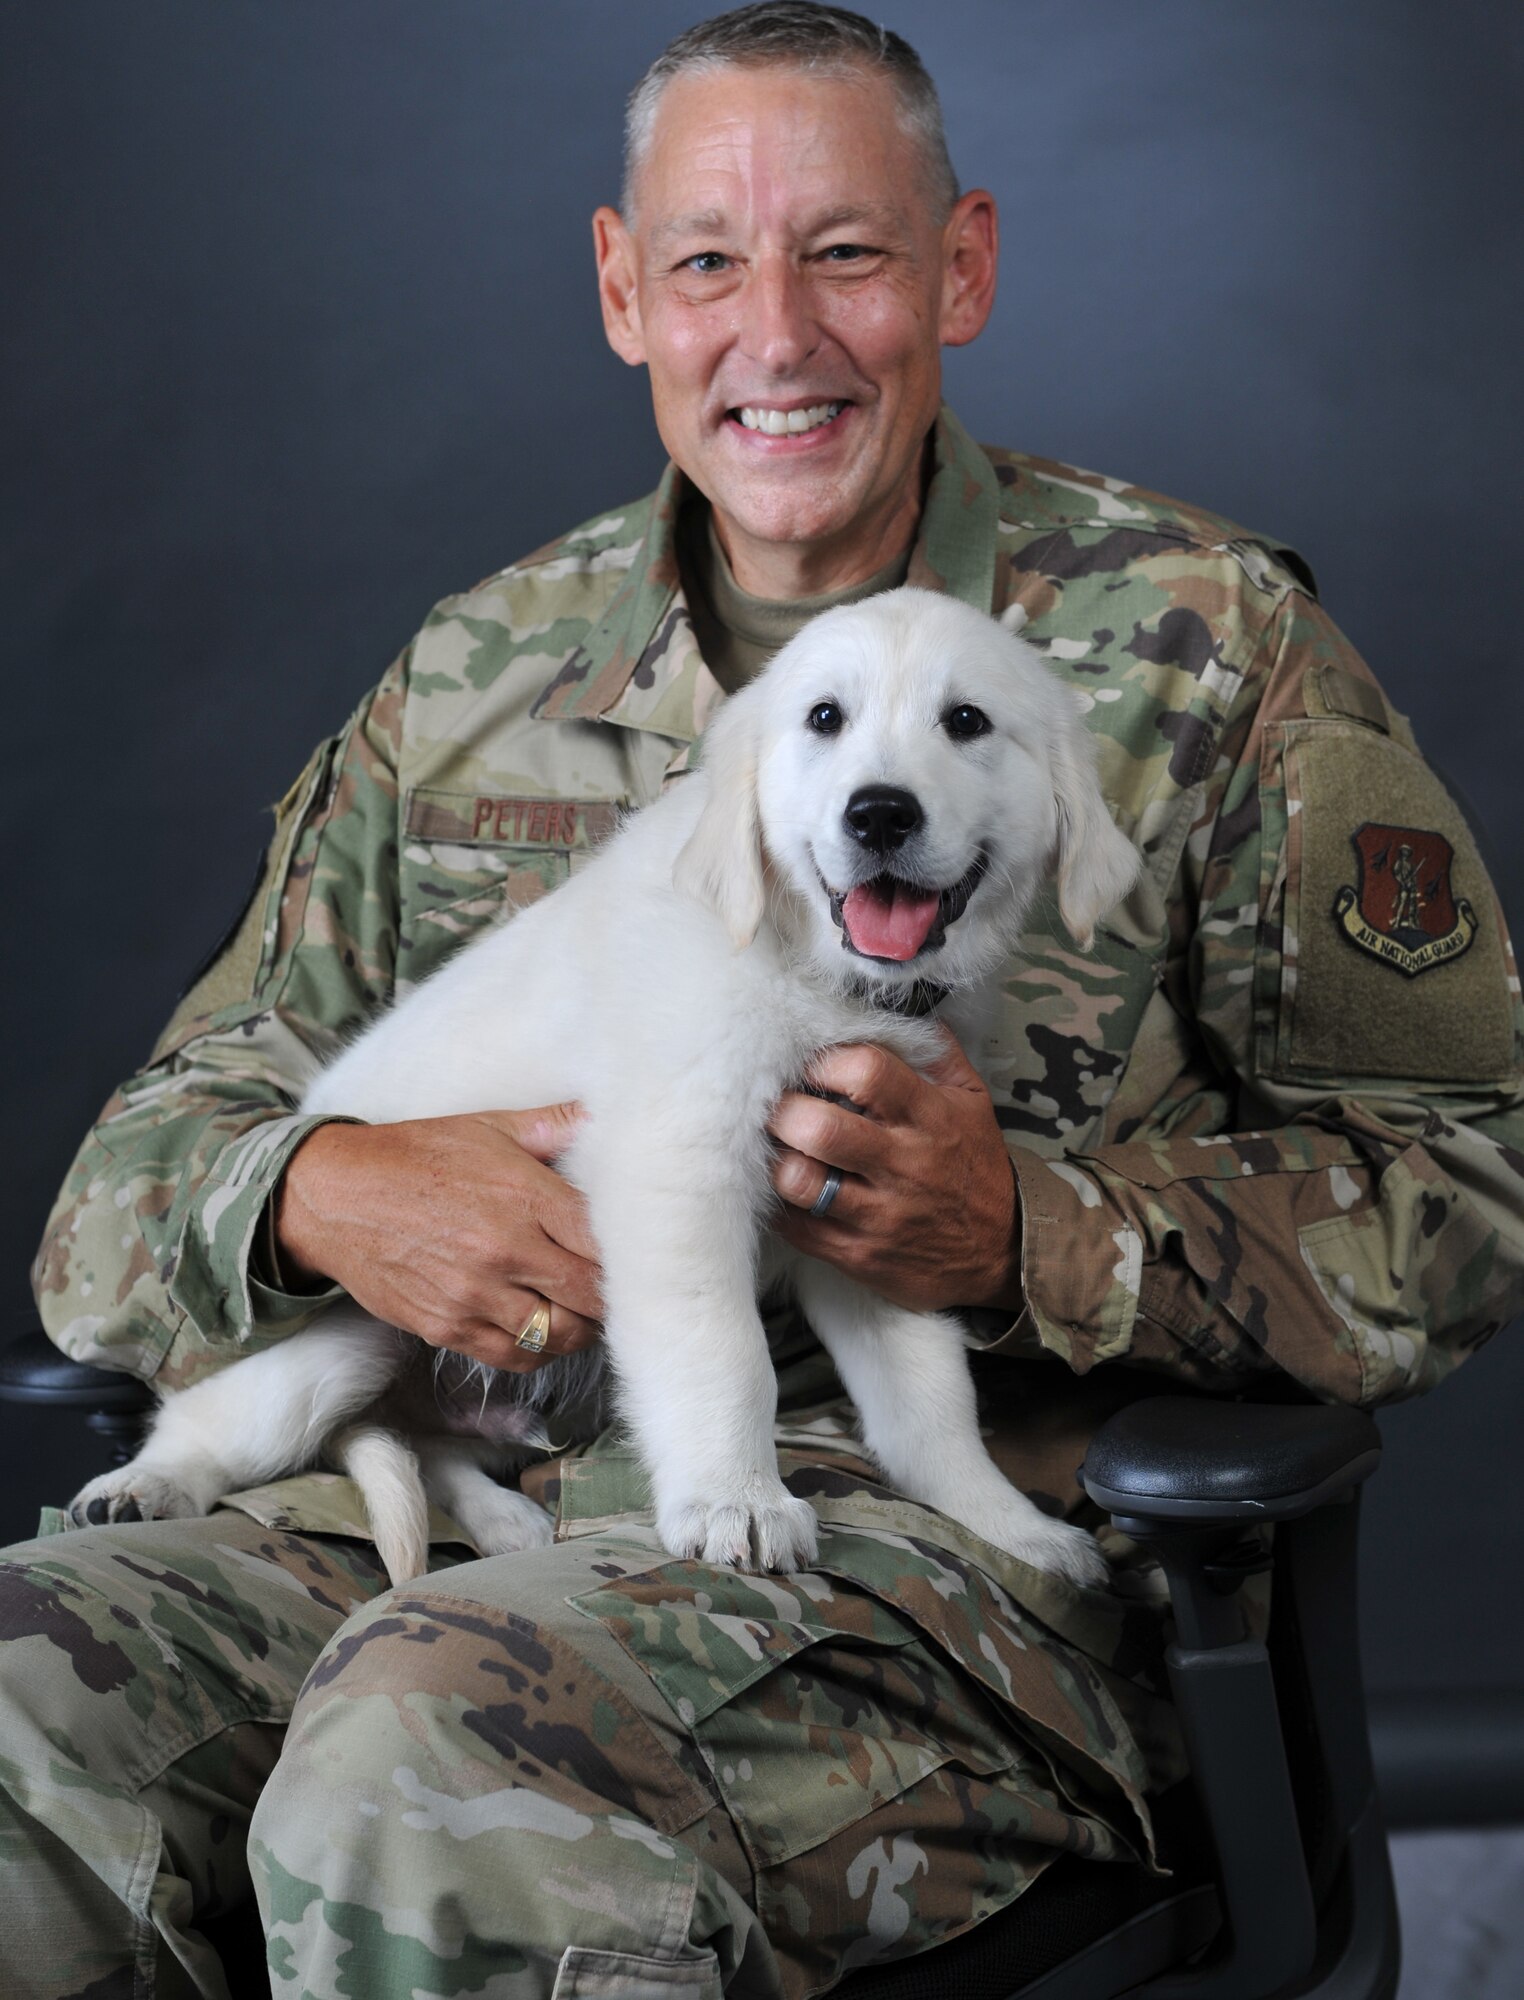 Lt. Col. Steve Peters, 185th Air Refueling Wing chaplain, with his dog, Lincoln, at the Iowa Air National Guard unit in Sioux City, Iowa, Aug. 13, 2020. Lincoln is an English Cream Golden Retriever puppy training to become a therapy dog at the Iowa Air Guard unit.